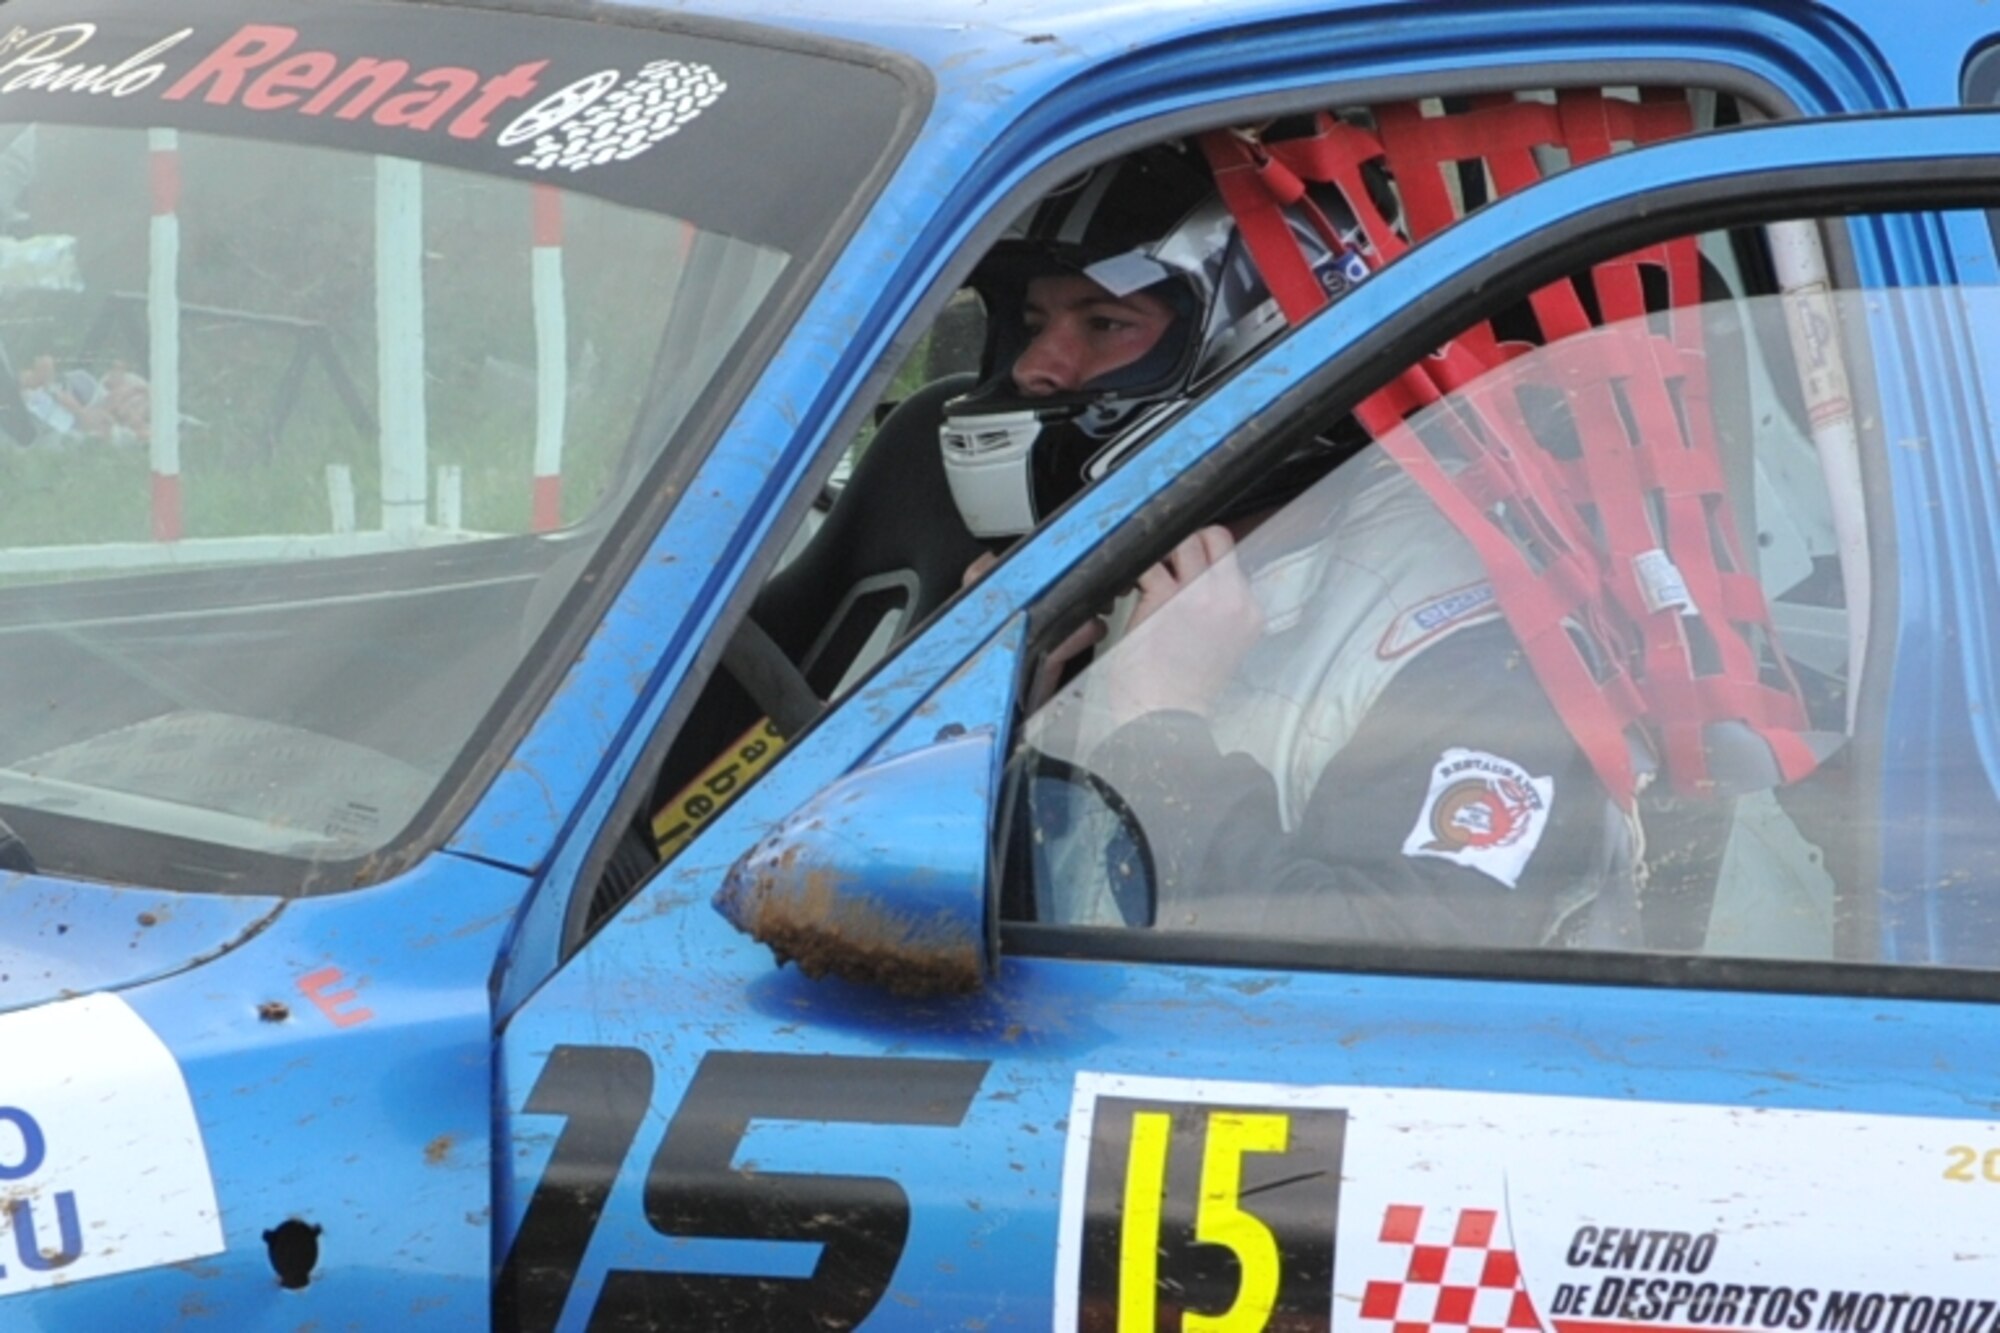 Staff Sgt. Joshua VanHorn dons his helmet before a rally race in Praia da Vitoria, Azores. VanHorn competes in car races with Portuguese local nationals in the Azores while building friendships and host nation relations within the local community. As the only U.S. participant, VanHorn displays an American flag with his last name on his rear driver's-side window. VanHorn is a 65th Medical Operations Squadron. 
